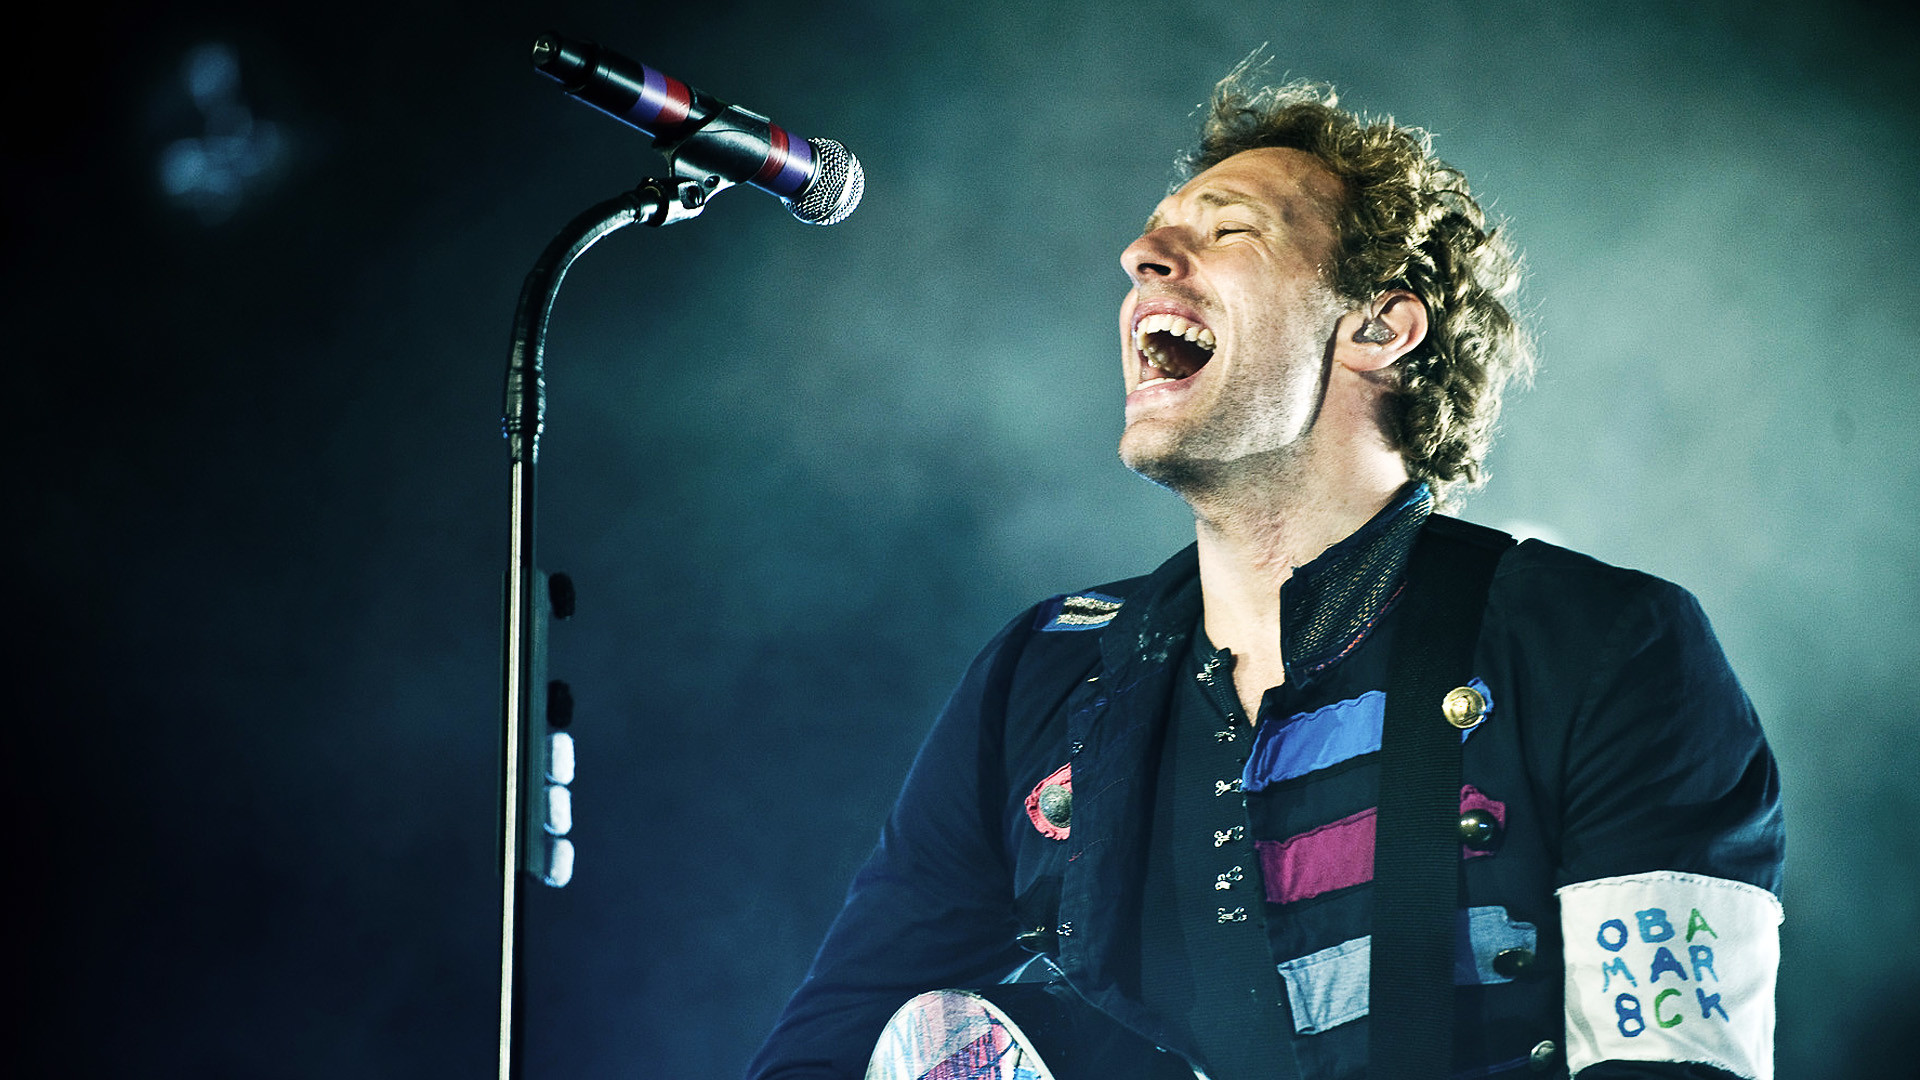 1920x1080 Coldplay high definition wallpapers. Coldplay download